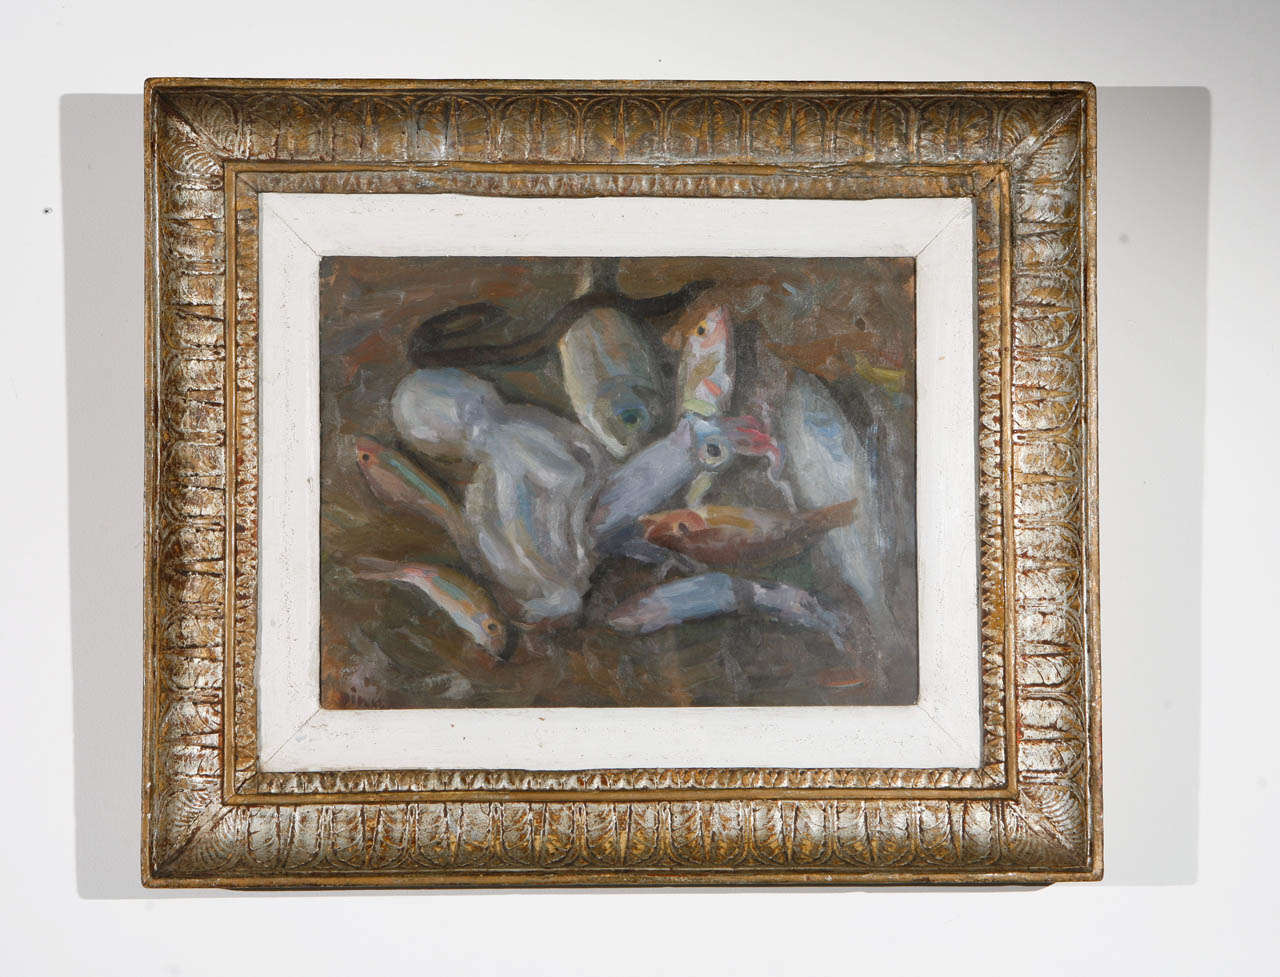 Still life painting of sea life, i.e., fish, octopus, squid, eel, etc., in oil on artist's board, covered in glass in a carved wood frame of distressed silver leaf. Actual image size 10